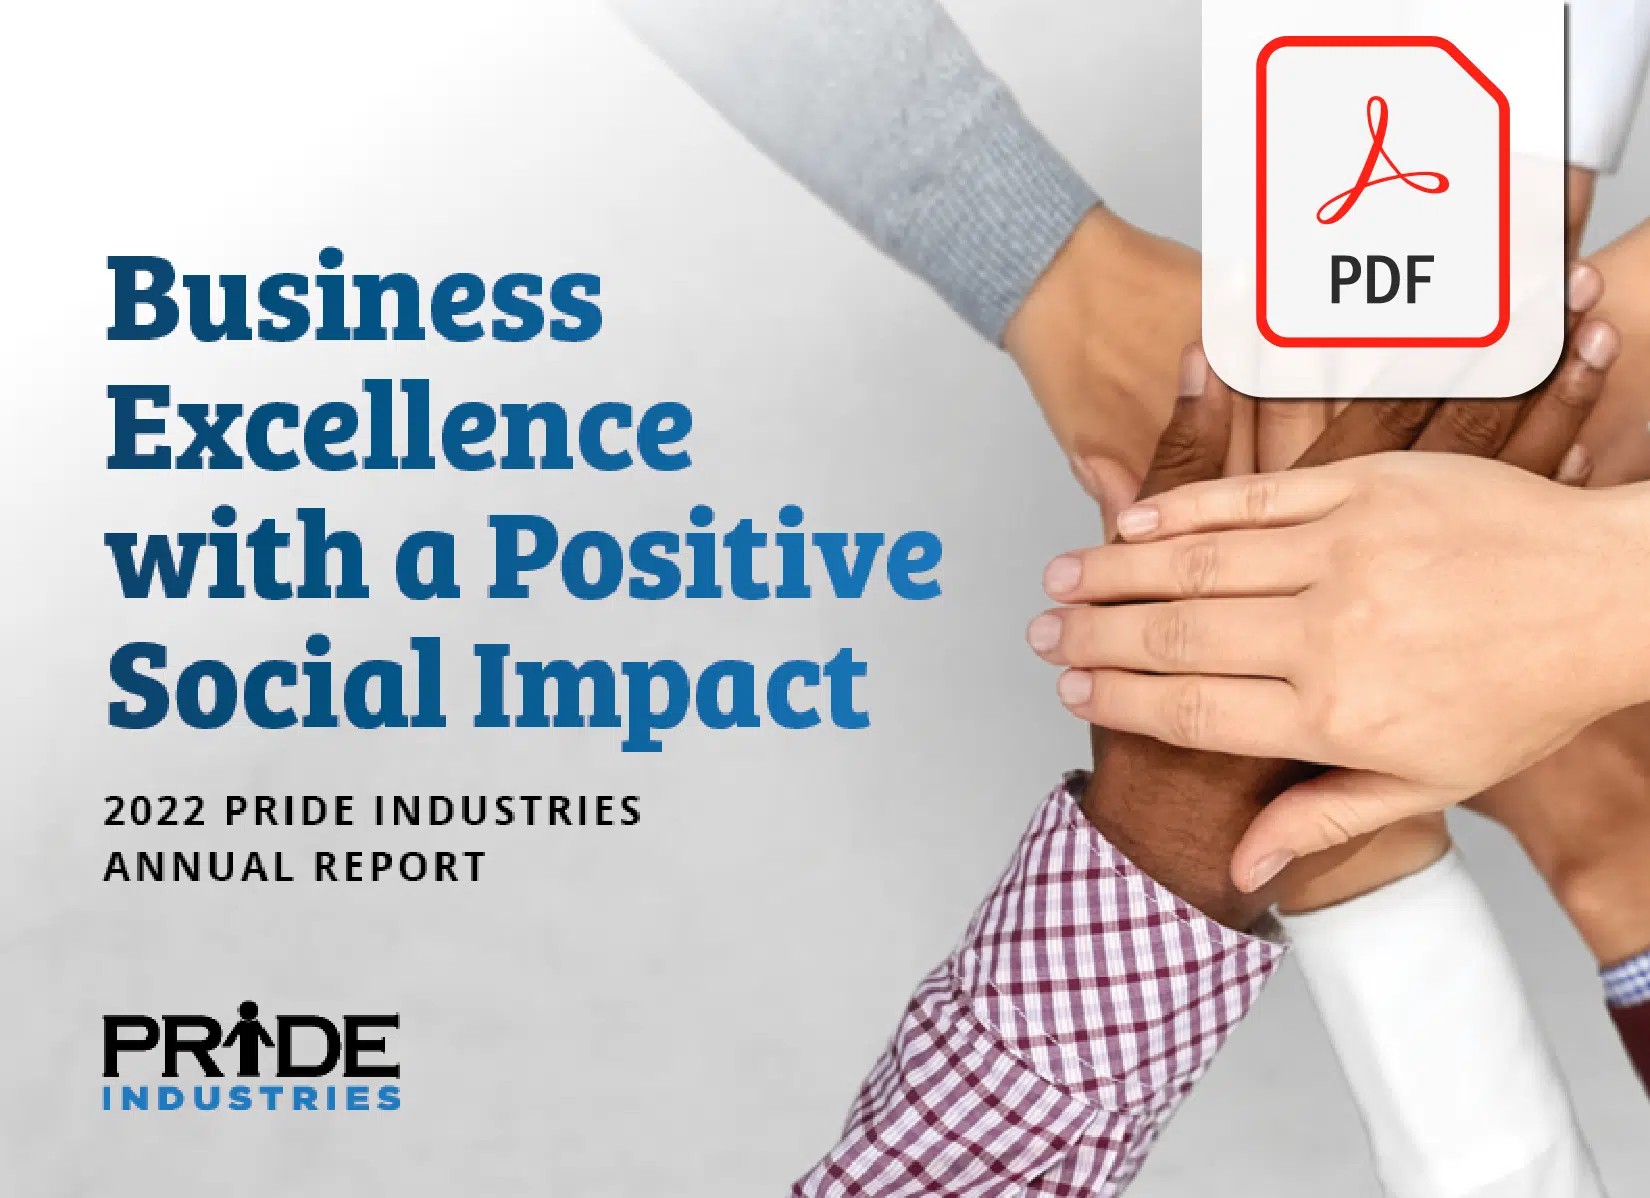 Hands stacked and text business excellence with a positive social impact 2022 pride industries annual report